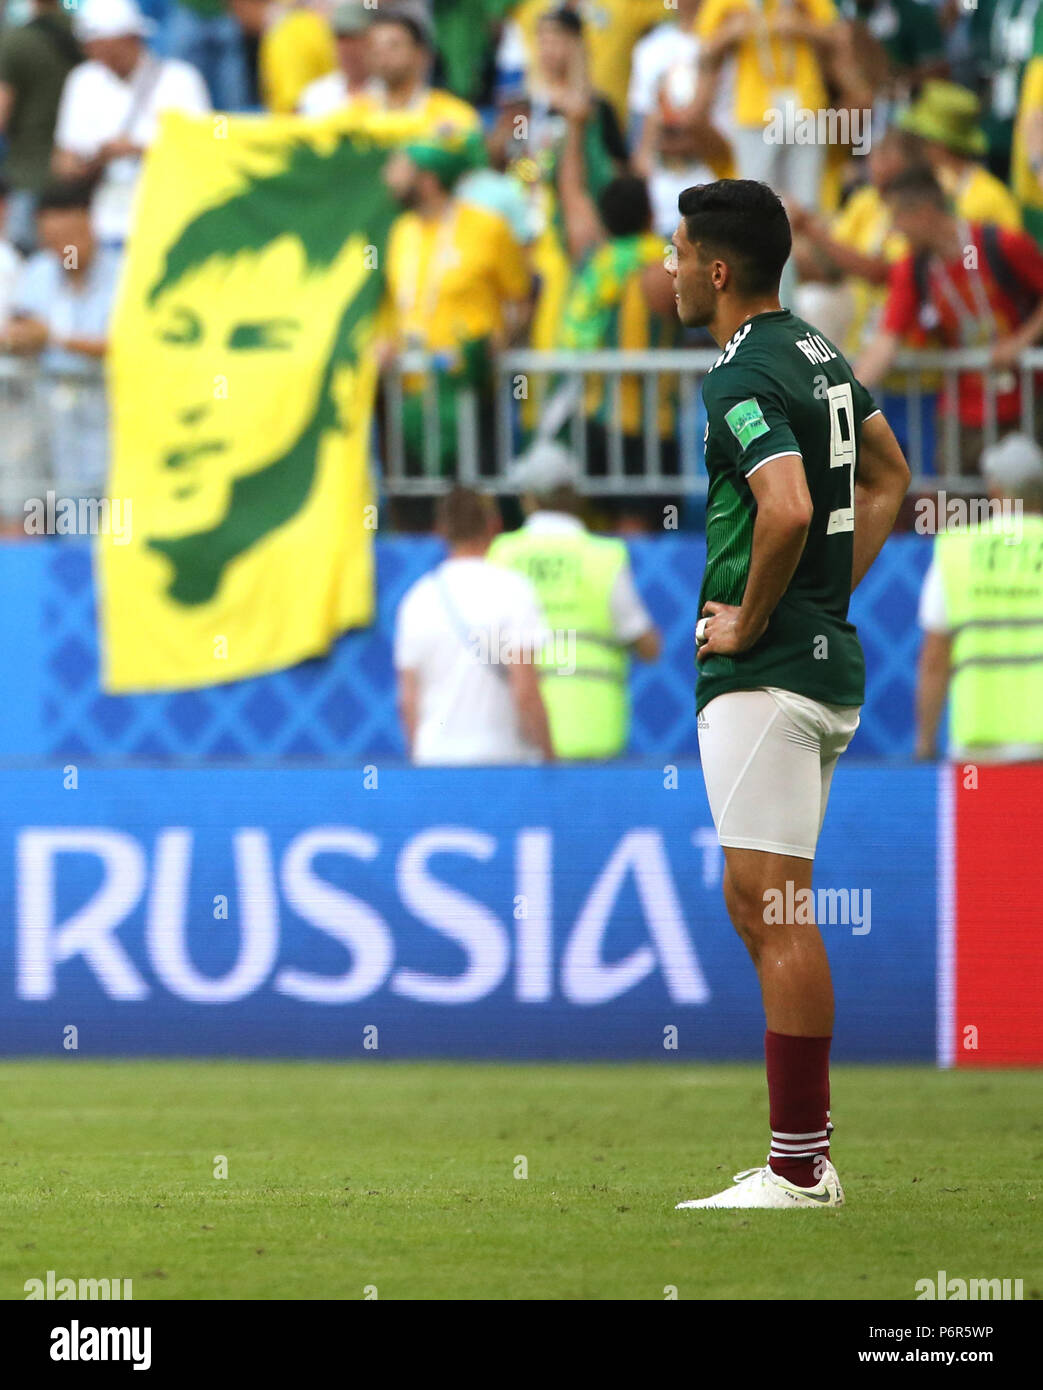 Samara, Russia. 2nd July, 2018. Raul Jimenez of Mexico is seen after the 2018 FIFA World Cup round of 16 match between Brazil and Mexico in Samara, Russia, July 2, 2018. Brazil won 2-0 and advanced to the quarter-final. Credit: Li Ming/Xinhua/Alamy Live News Stock Photo